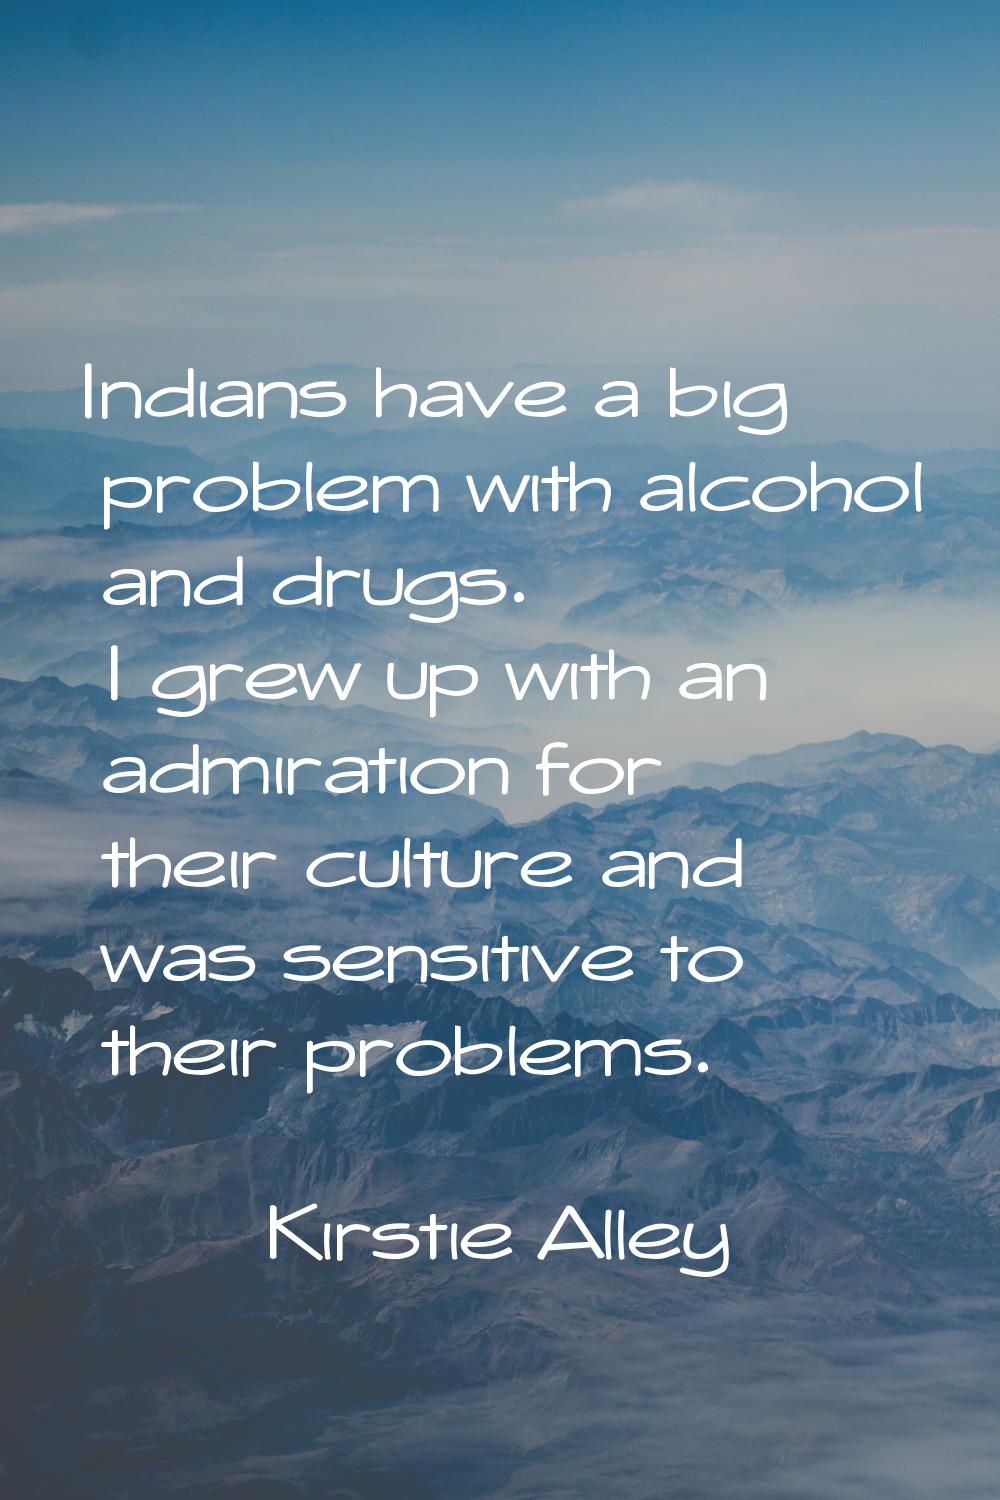 Indians have a big problem with alcohol and drugs. I grew up with an admiration for their culture a